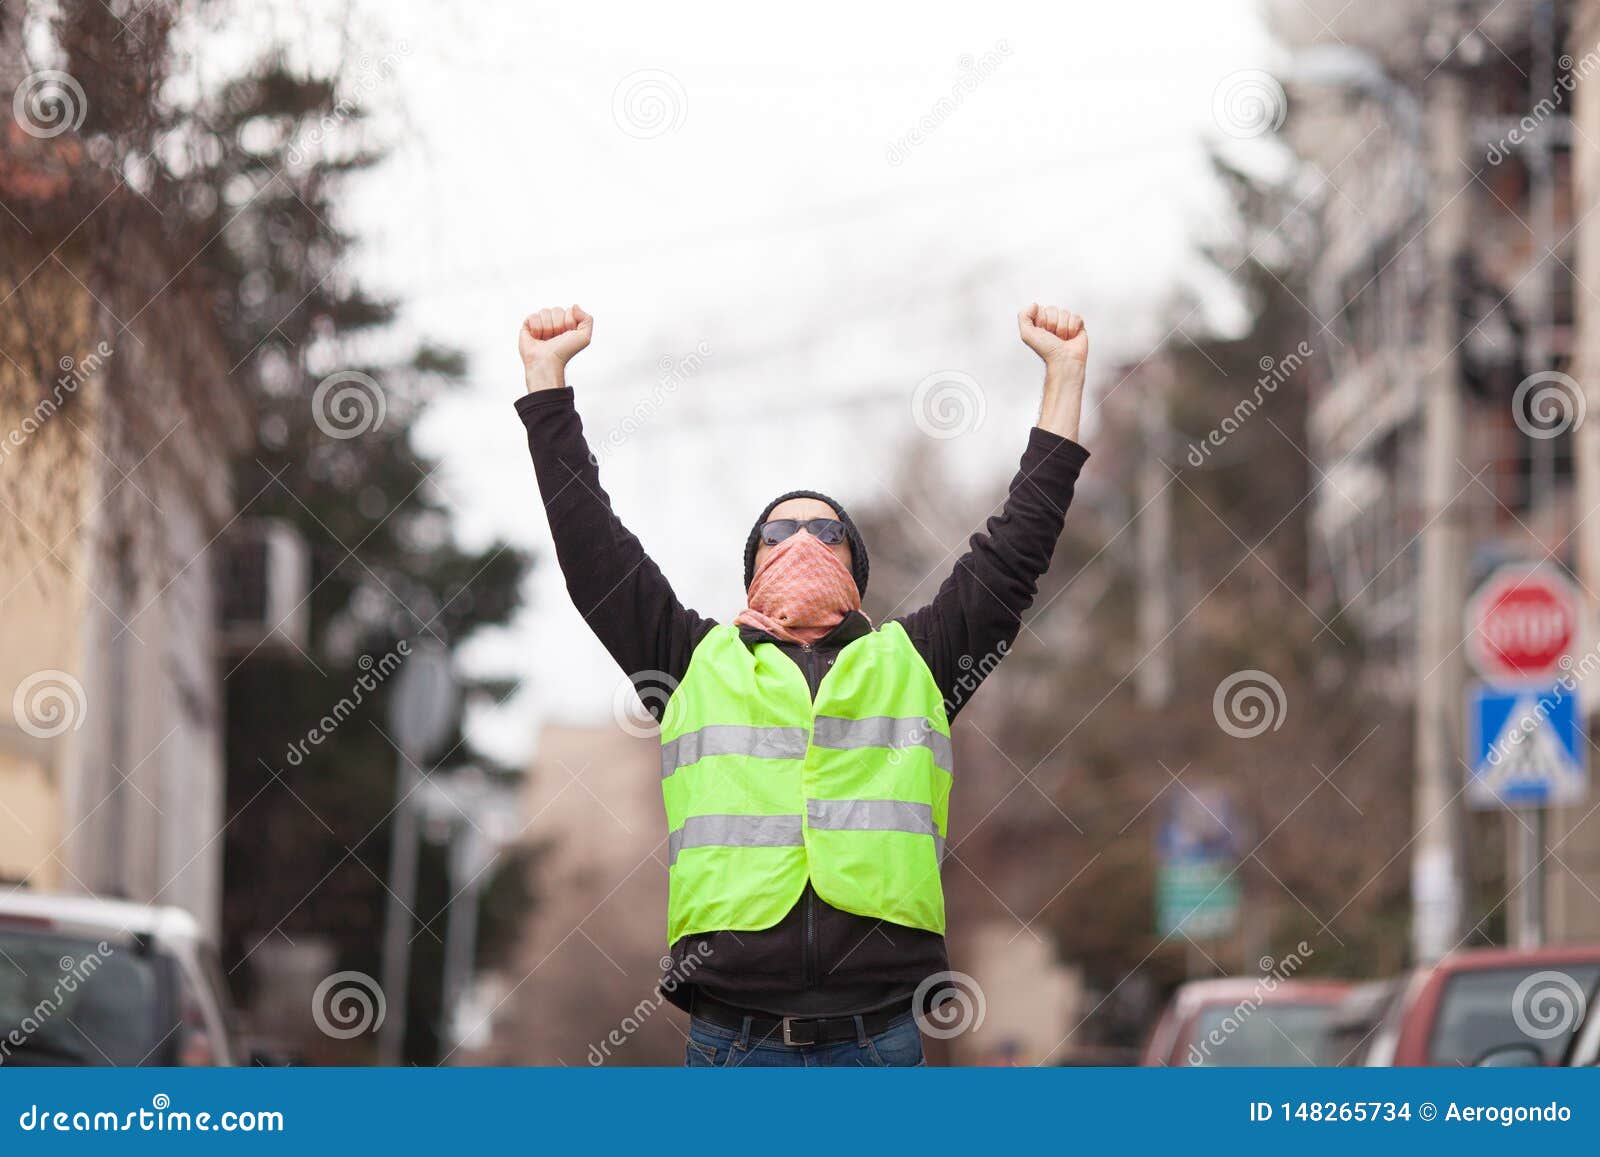 Yellow Vest Political Activist Protesting on Street Stock Photo - Image ...